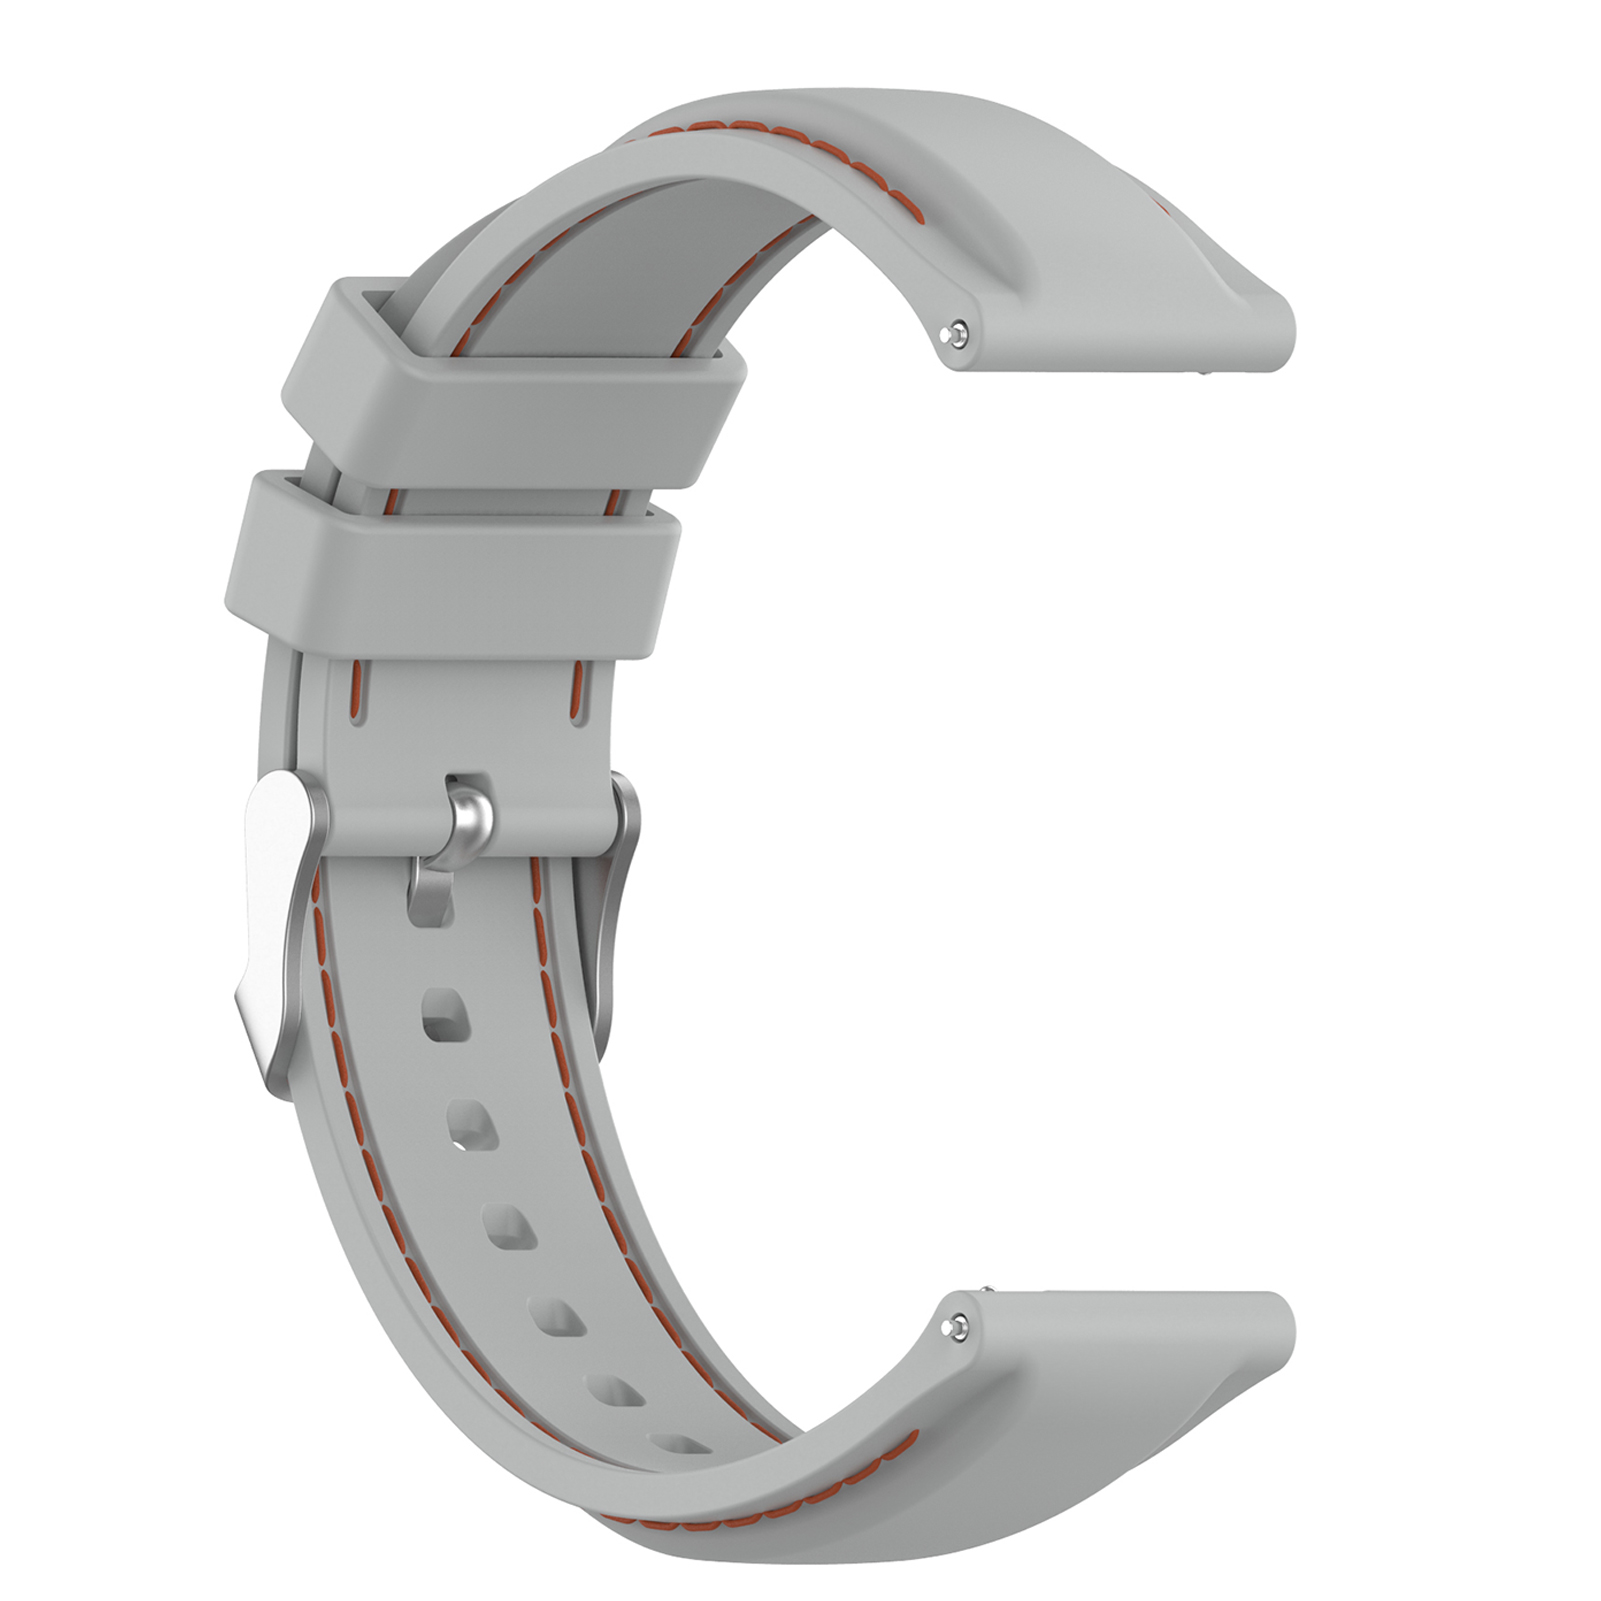 22mm-Soft-Silicone-Watch-Strap-Band-Replacement-Sport-Bracelet-Watchband-For-Ticwatch-Pro3LTE-Haylou-1809083-8